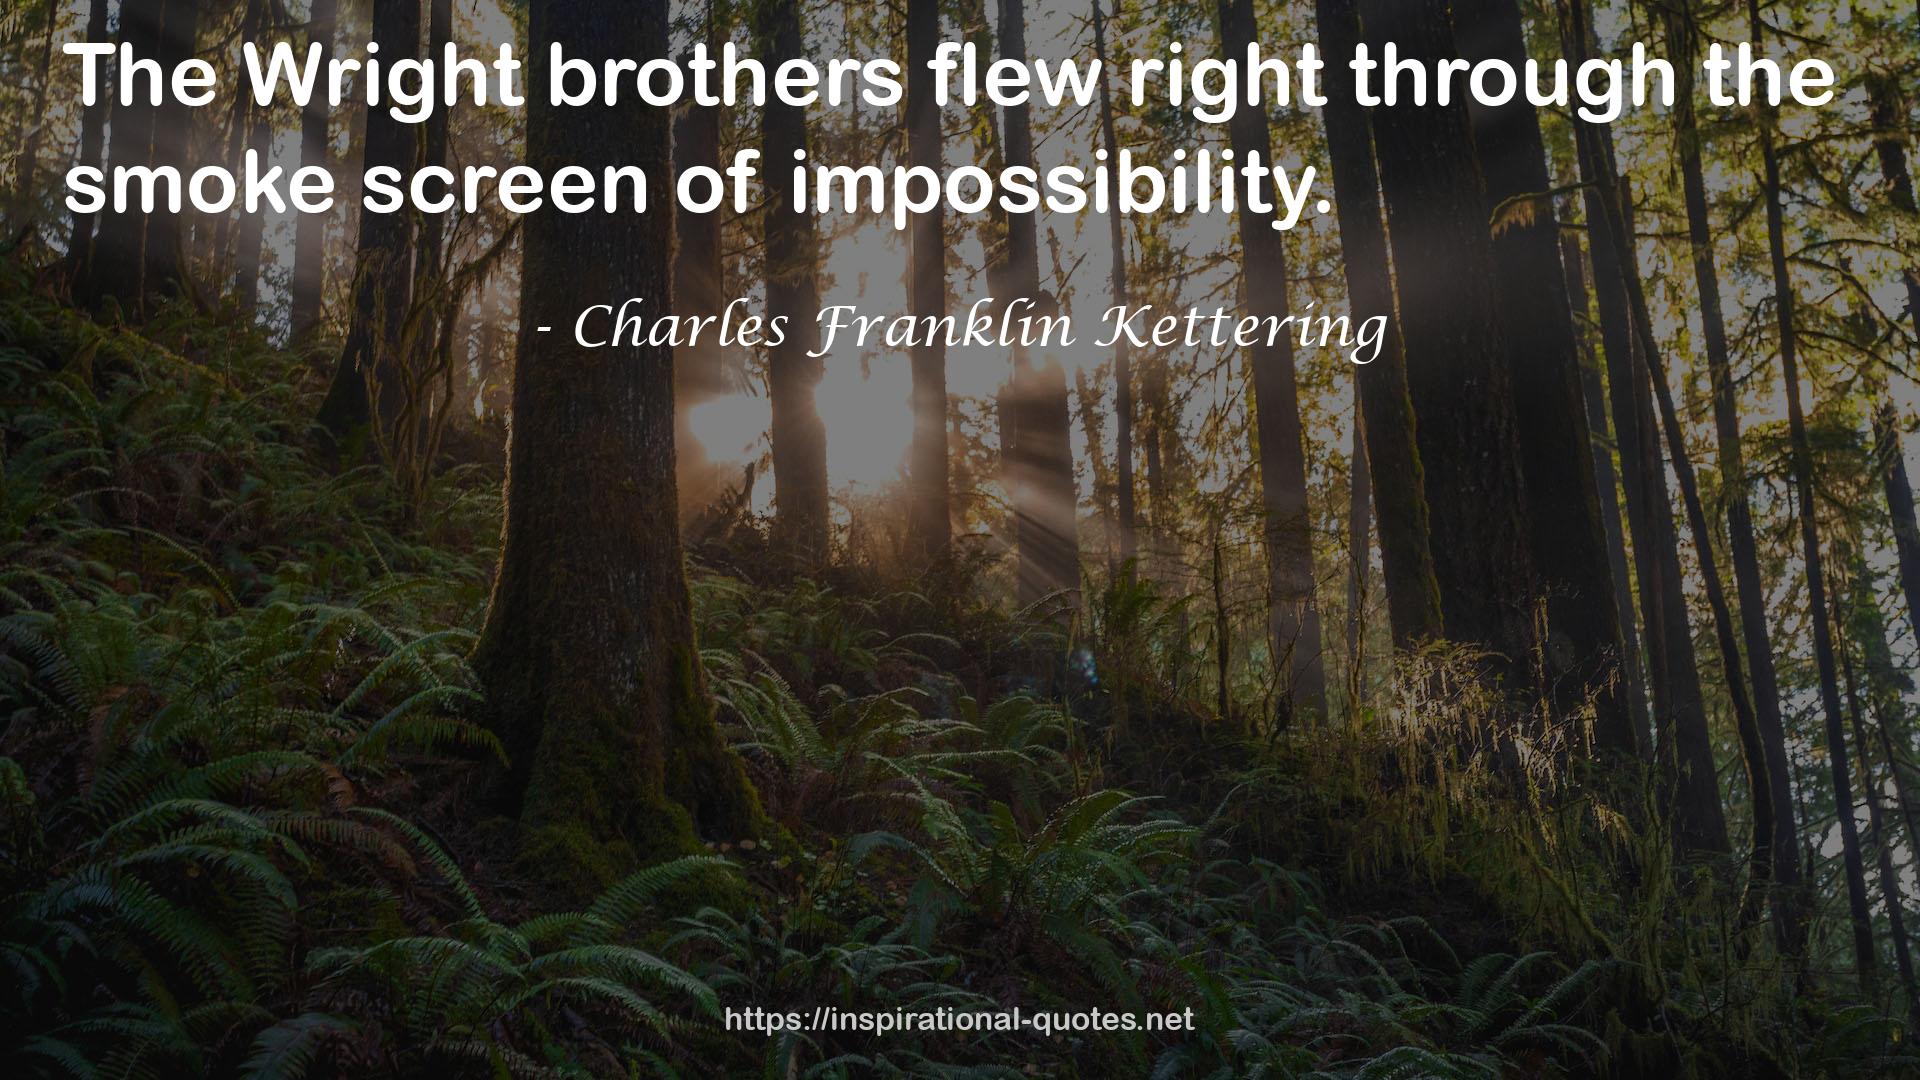 Charles Franklin Kettering QUOTES